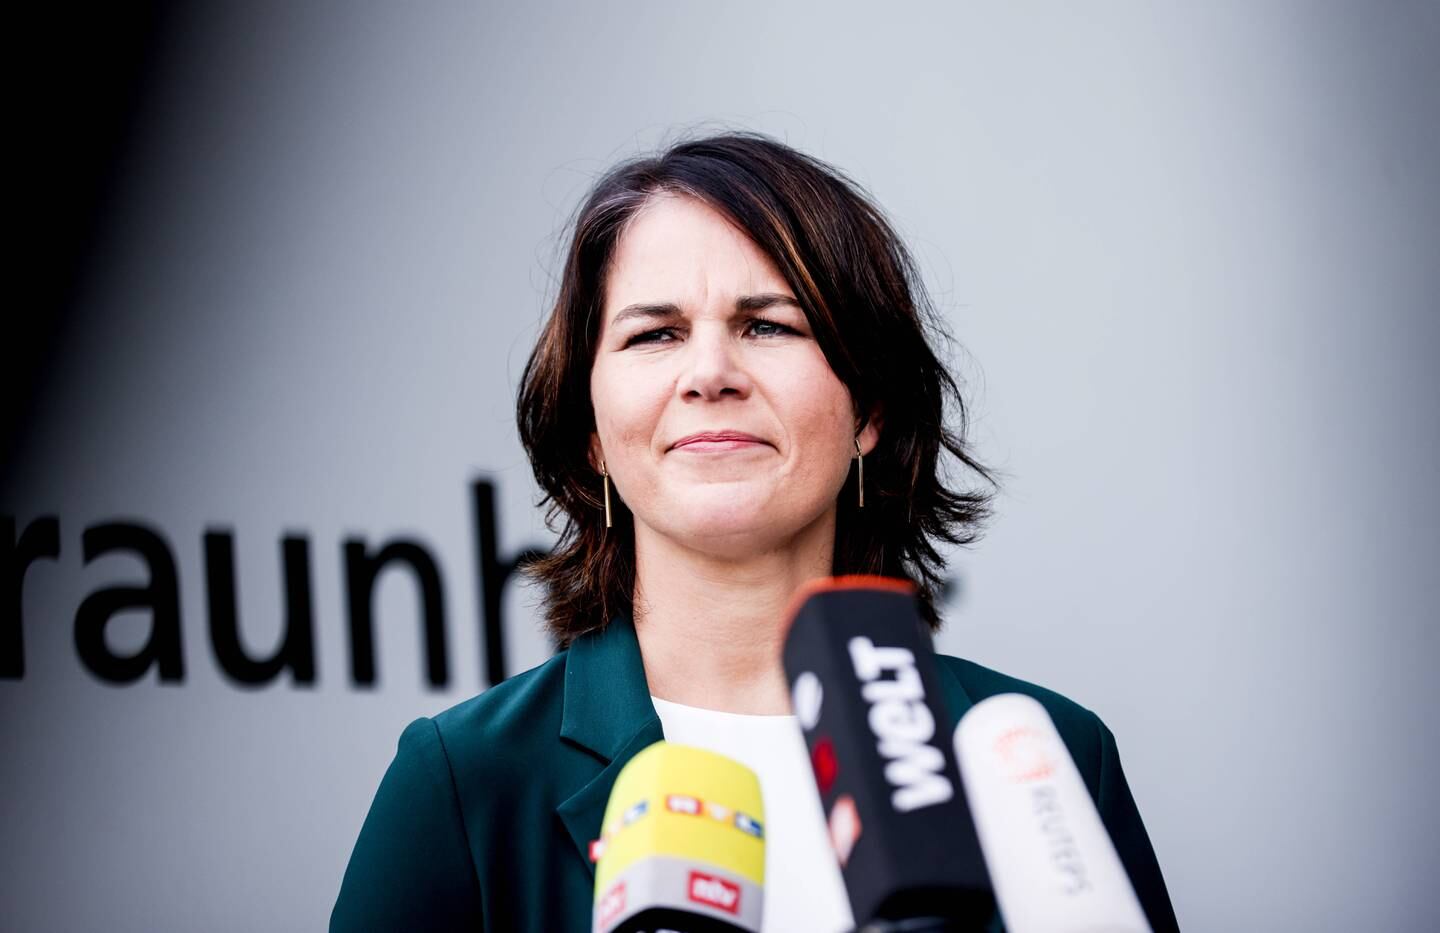 Annalena Baerbock, the Green party's candidate for the chancellery, has come under attack by Russian media outlets. EPA  